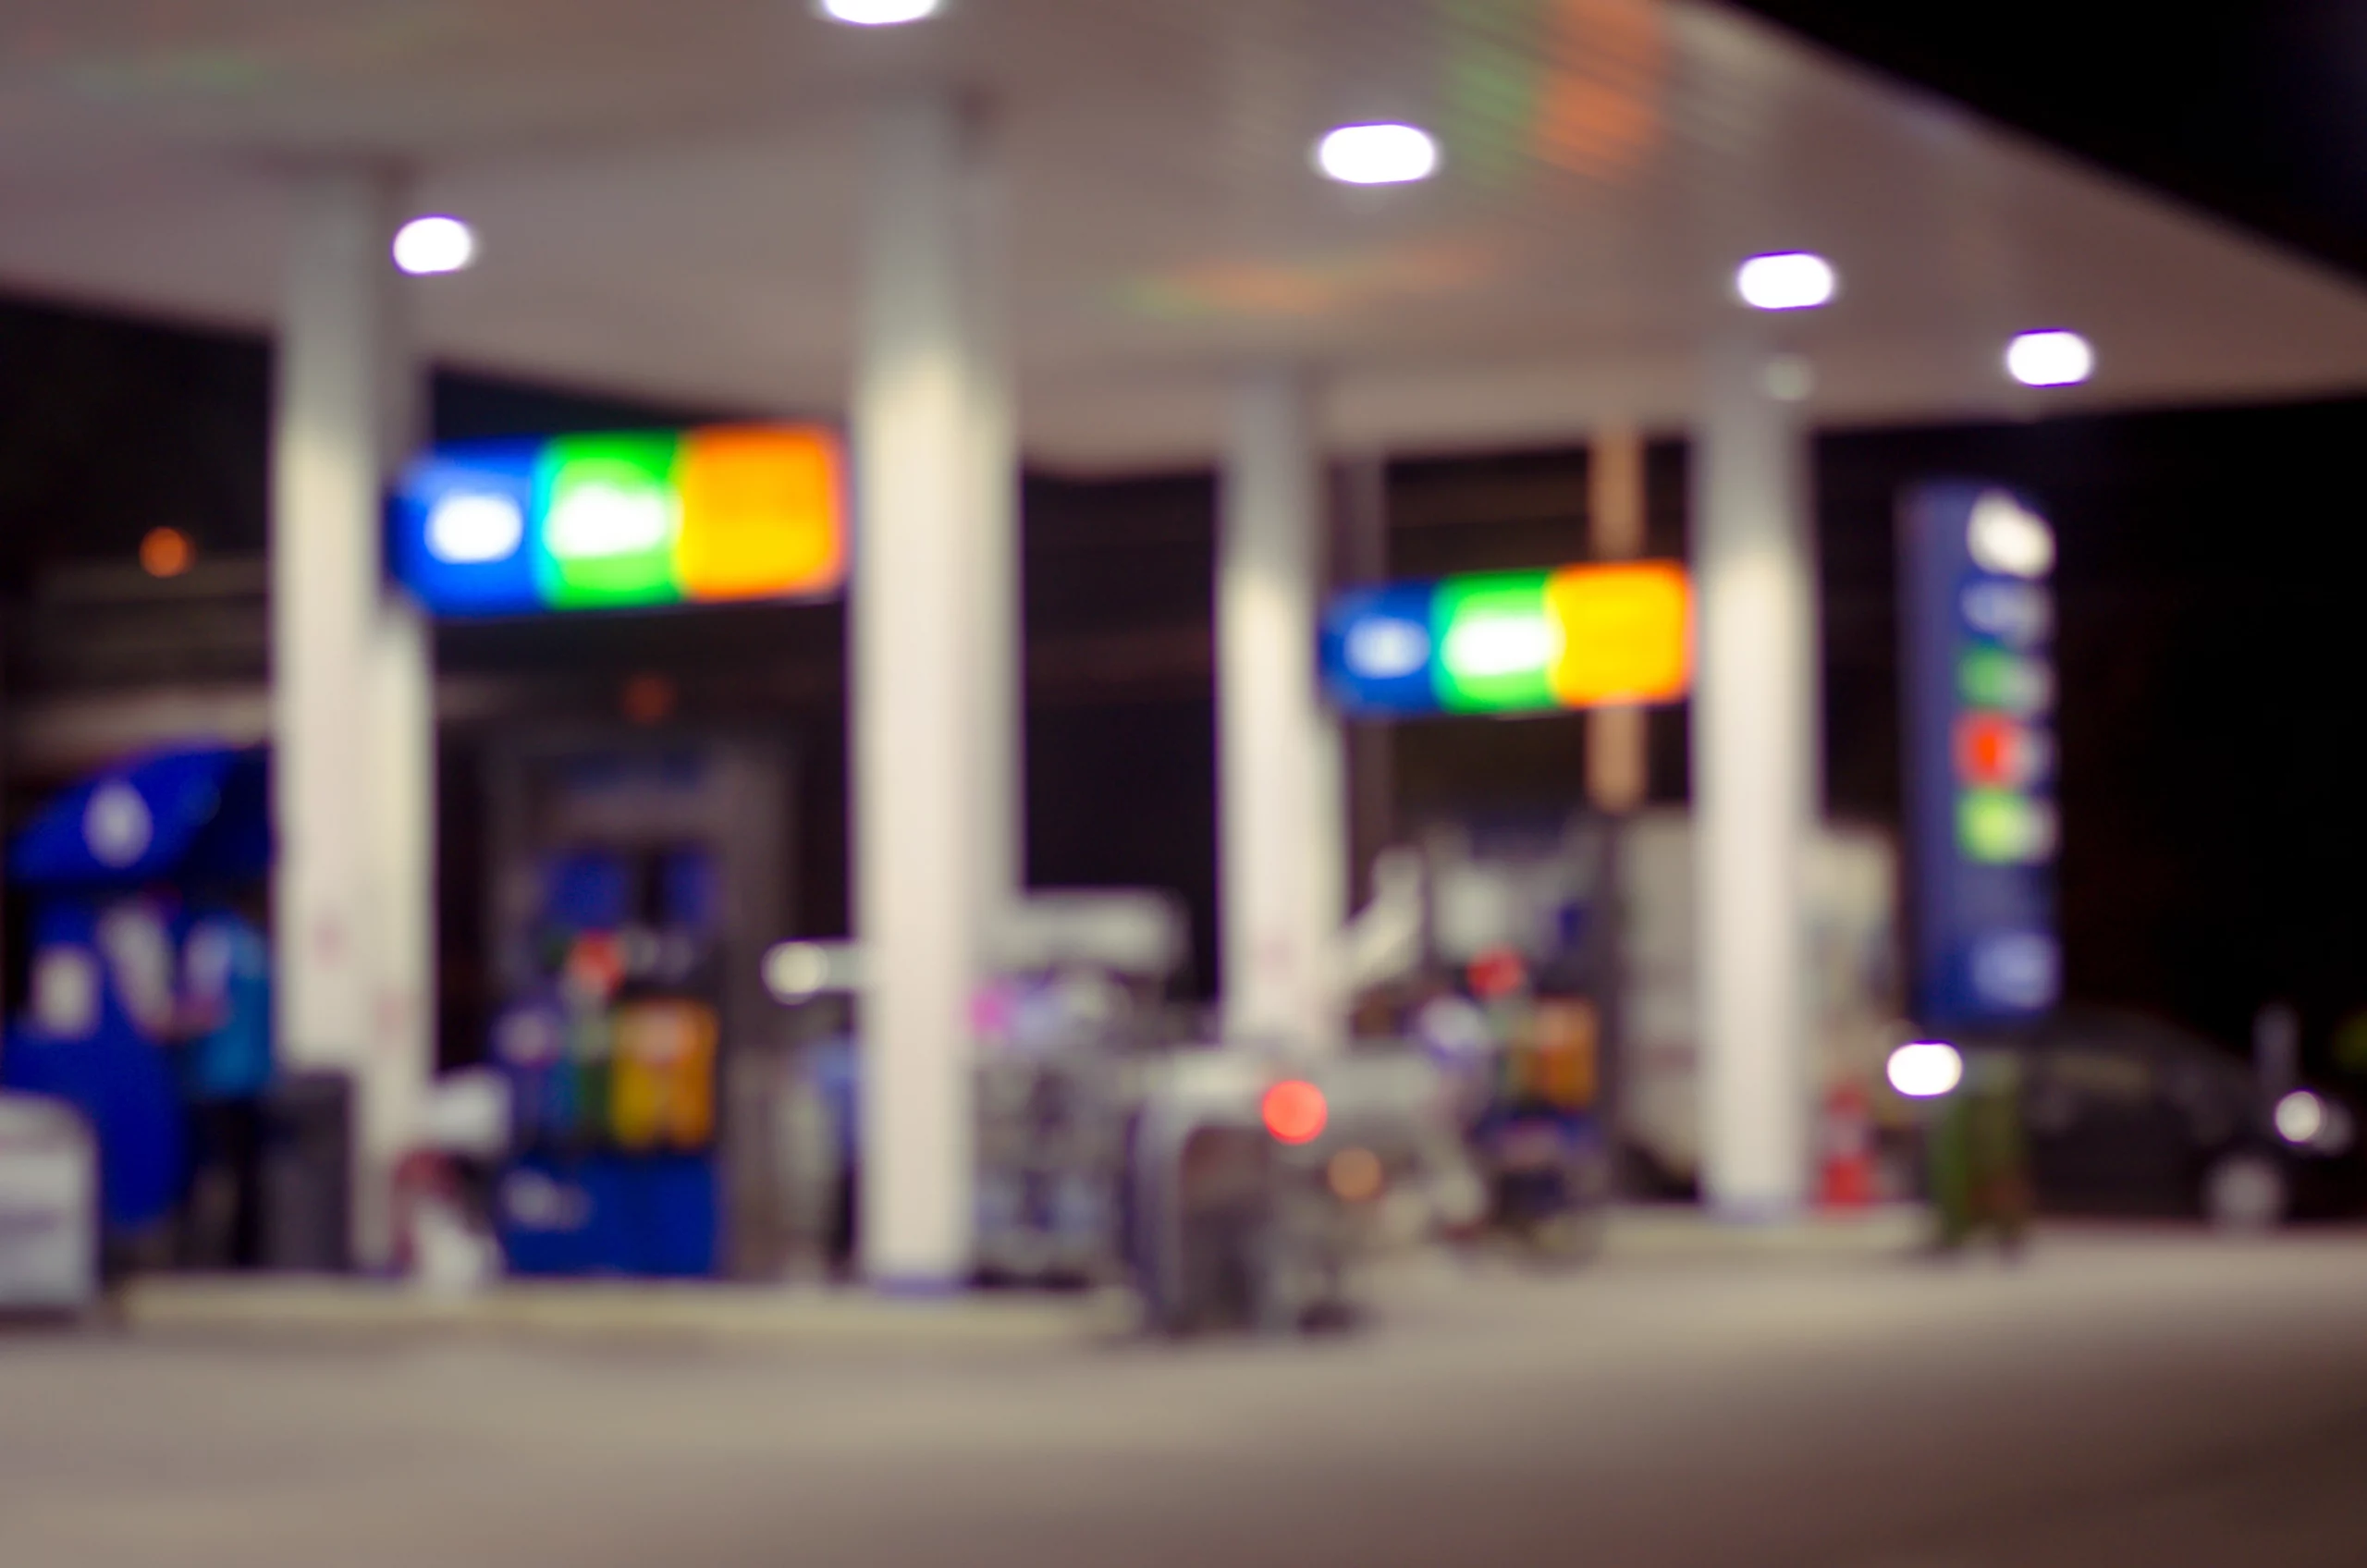 A blurry image of a gas station.